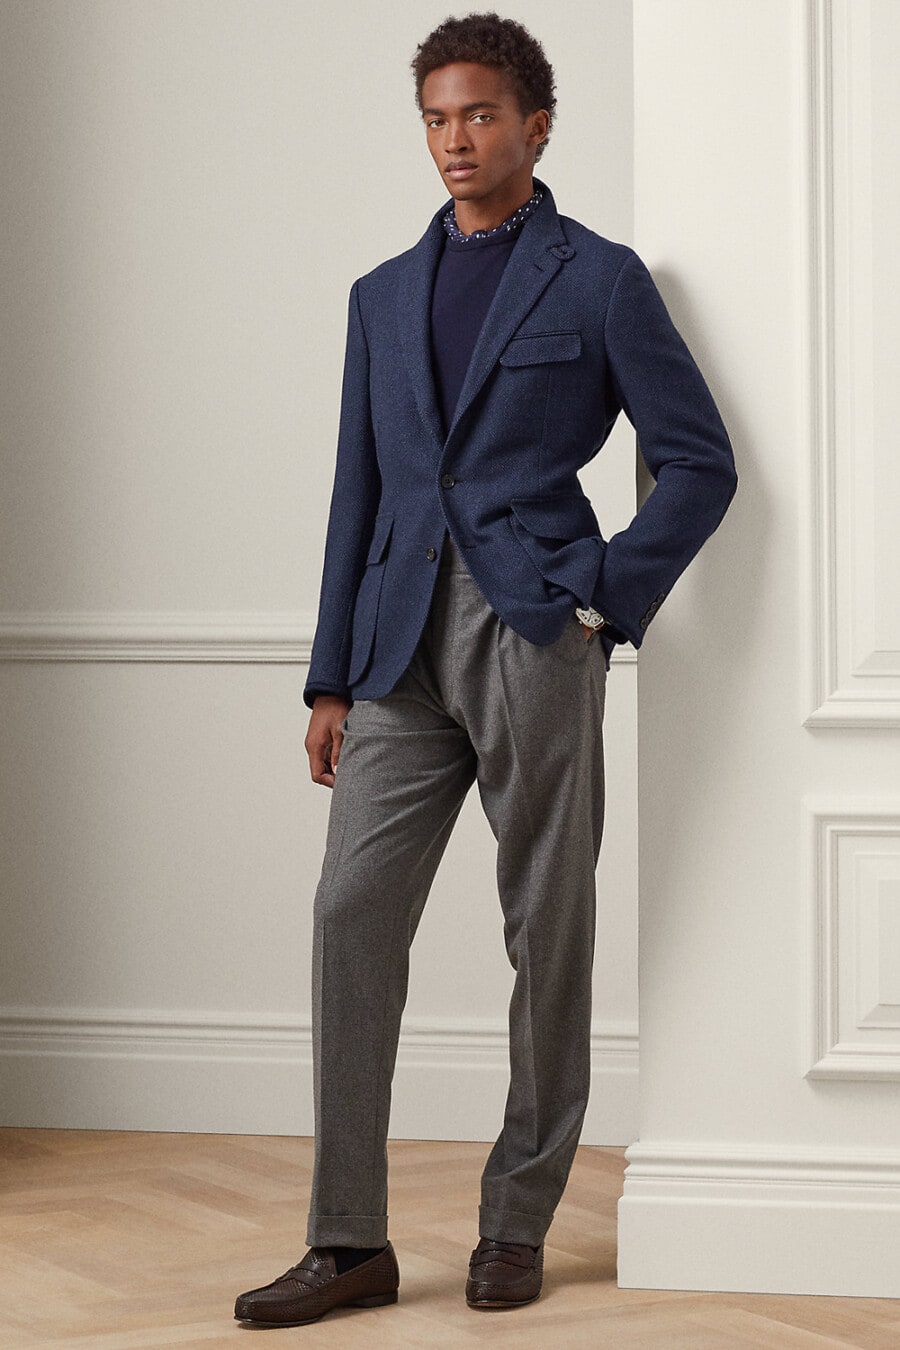 Navy knitted blazer, navy crew-neck sweater, dark grey tailored wool pants and brown leather penny loafers outfit